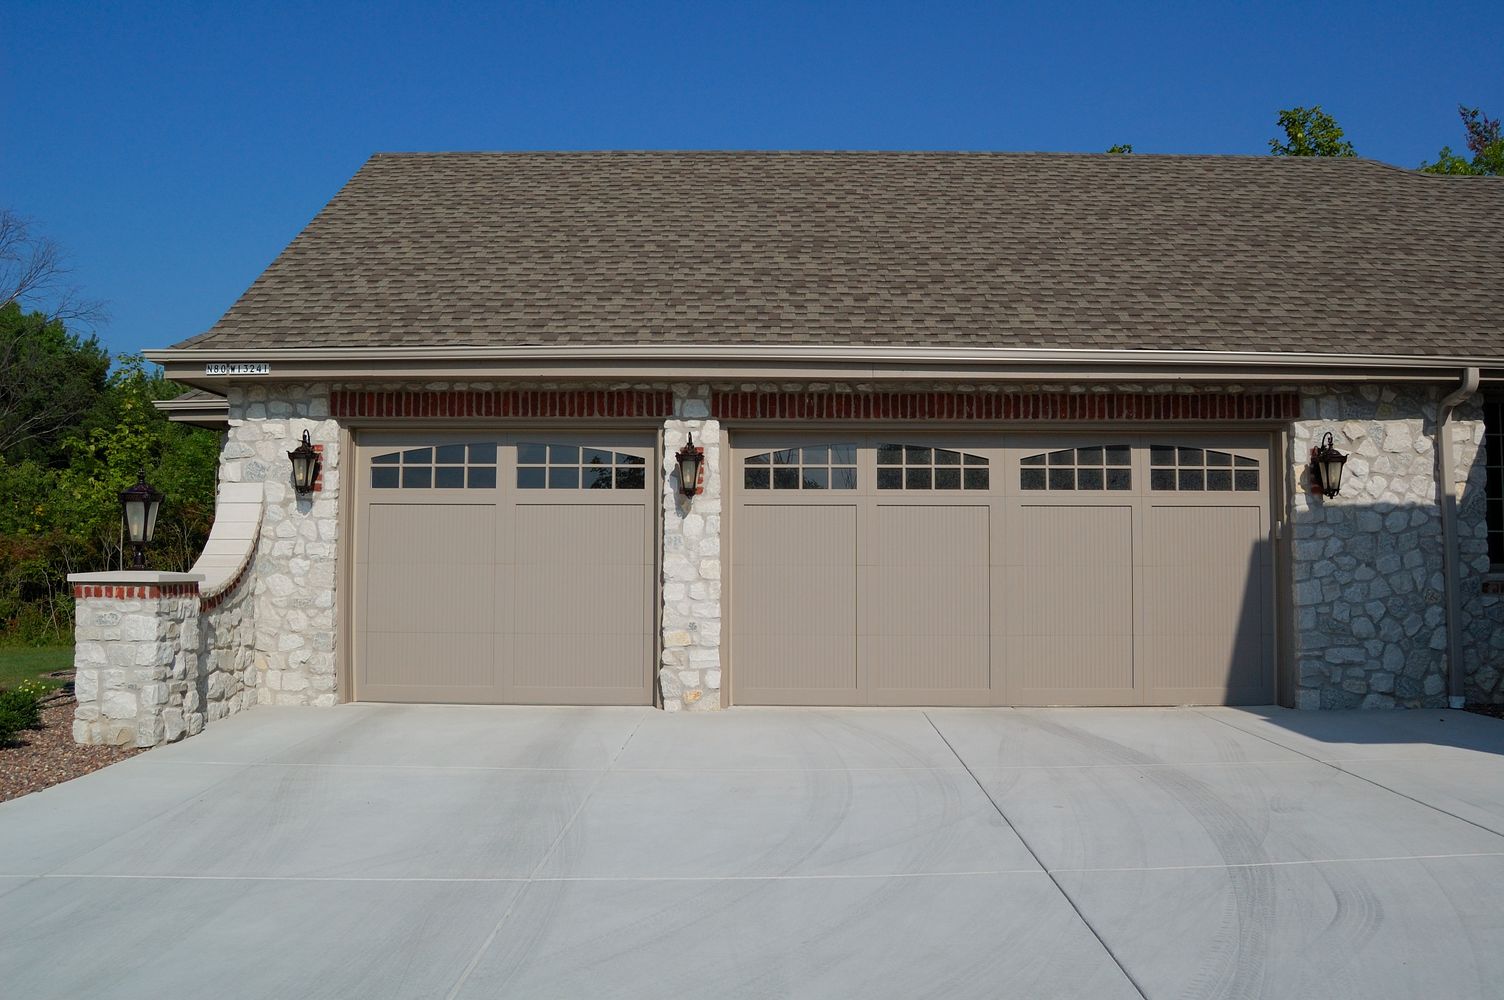 tan single and two car garage doors with arched windows by chi ohd